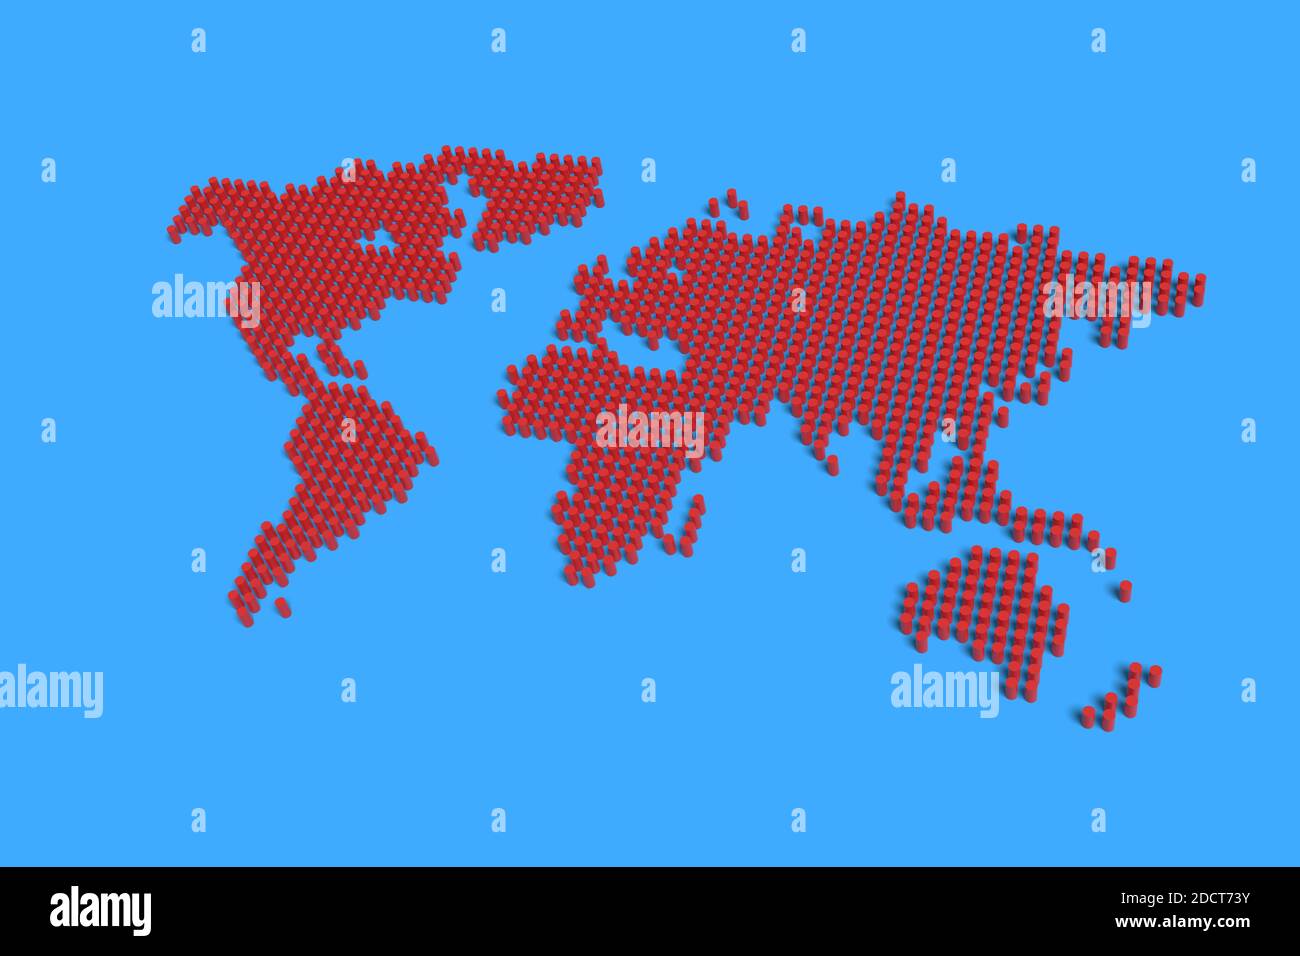 World map made of red columns. 3d illustration. Stock Photo